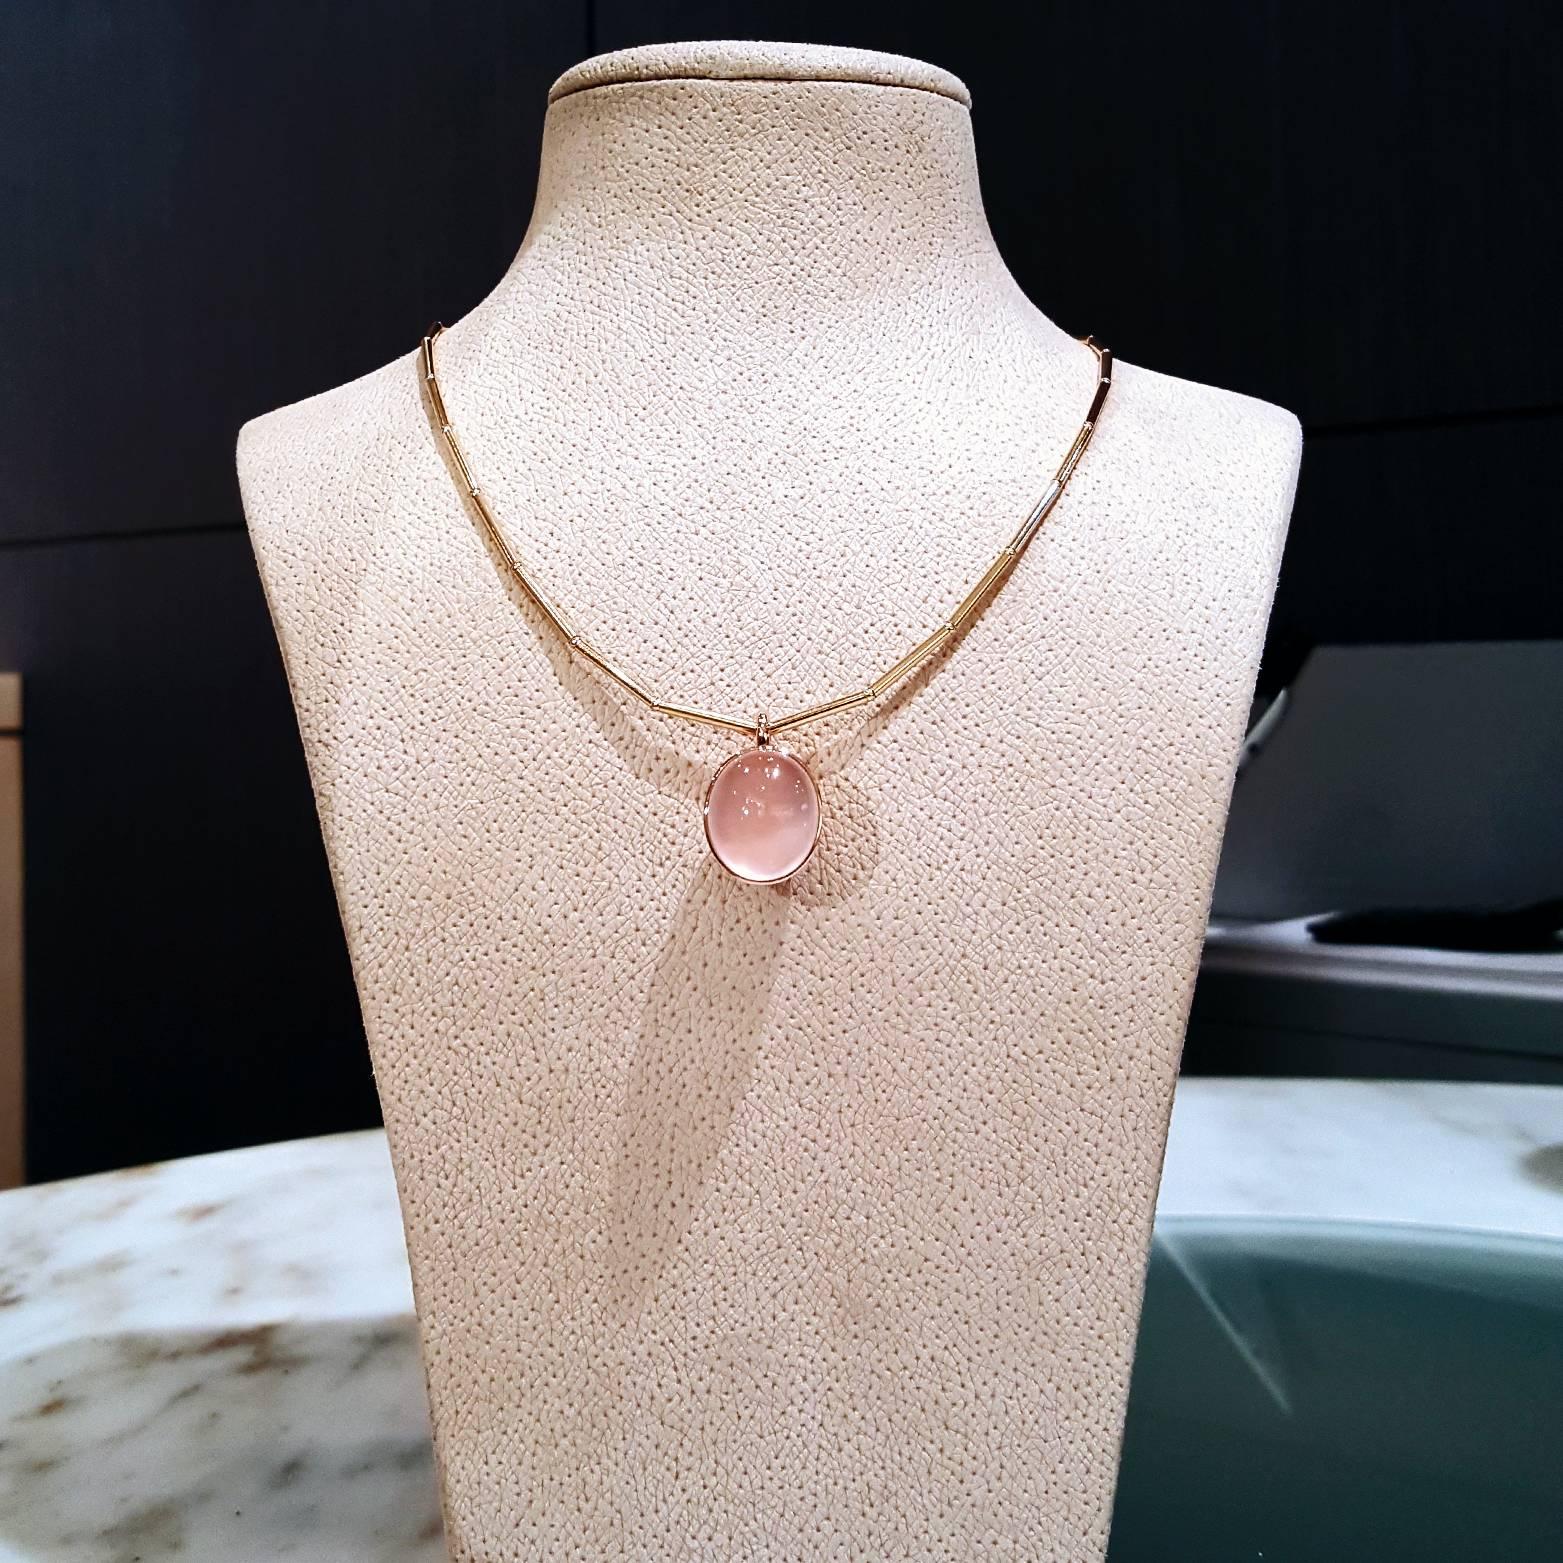 One-of-a-Kind Bowl Pendant handcrafted in 18k gold with a 20.01 carat oval cabochon-cut rose quartz. The Rose quartz, natural and hand-cut in Germany, has truly phenomenal optical qualities as it glows in any light setting. 

Pendant priced with